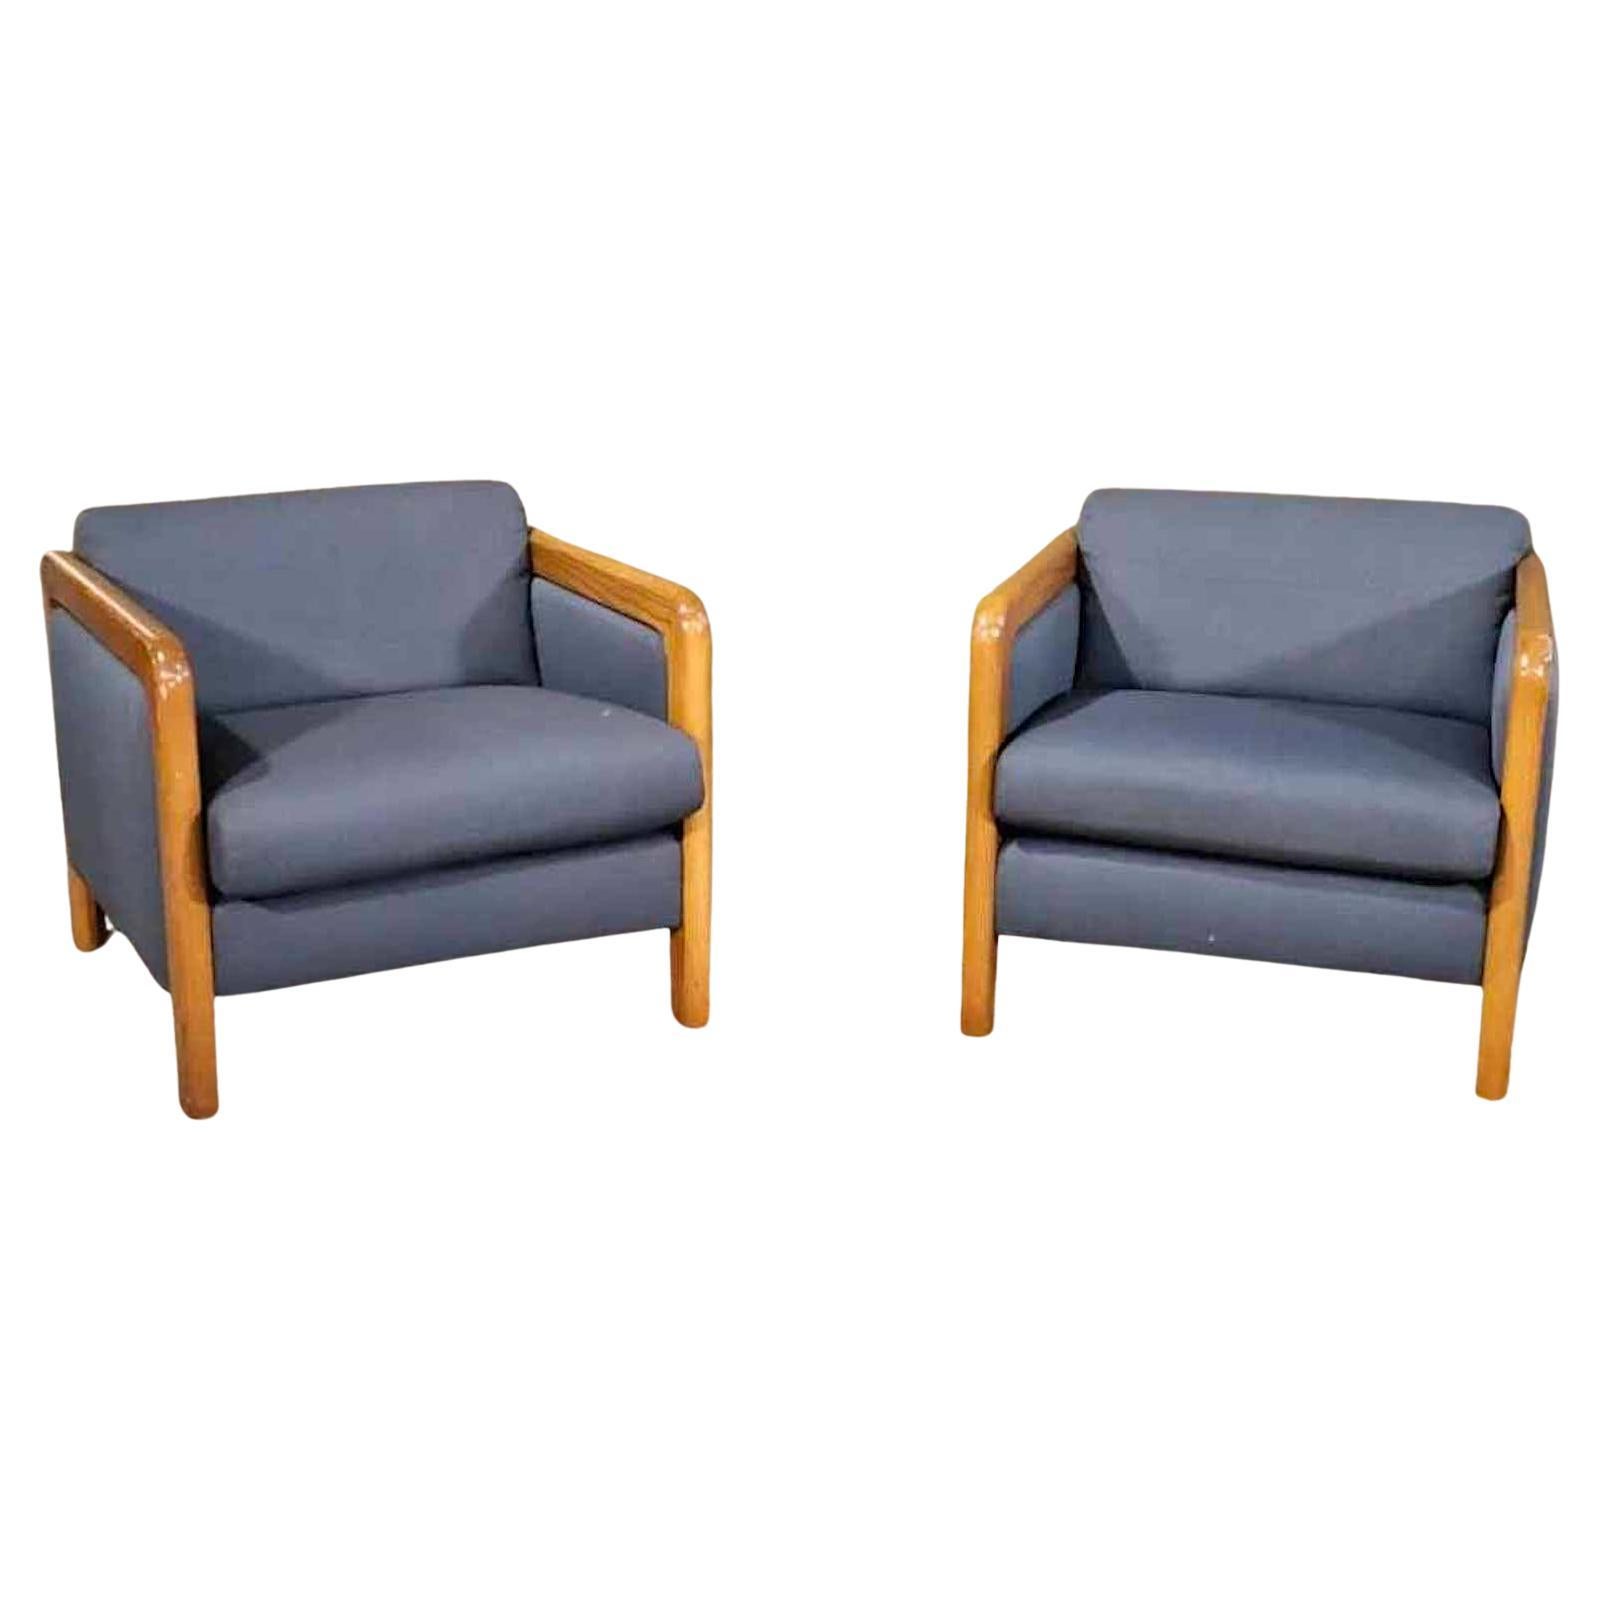 Wood Frame Lounge Chairs For Sale